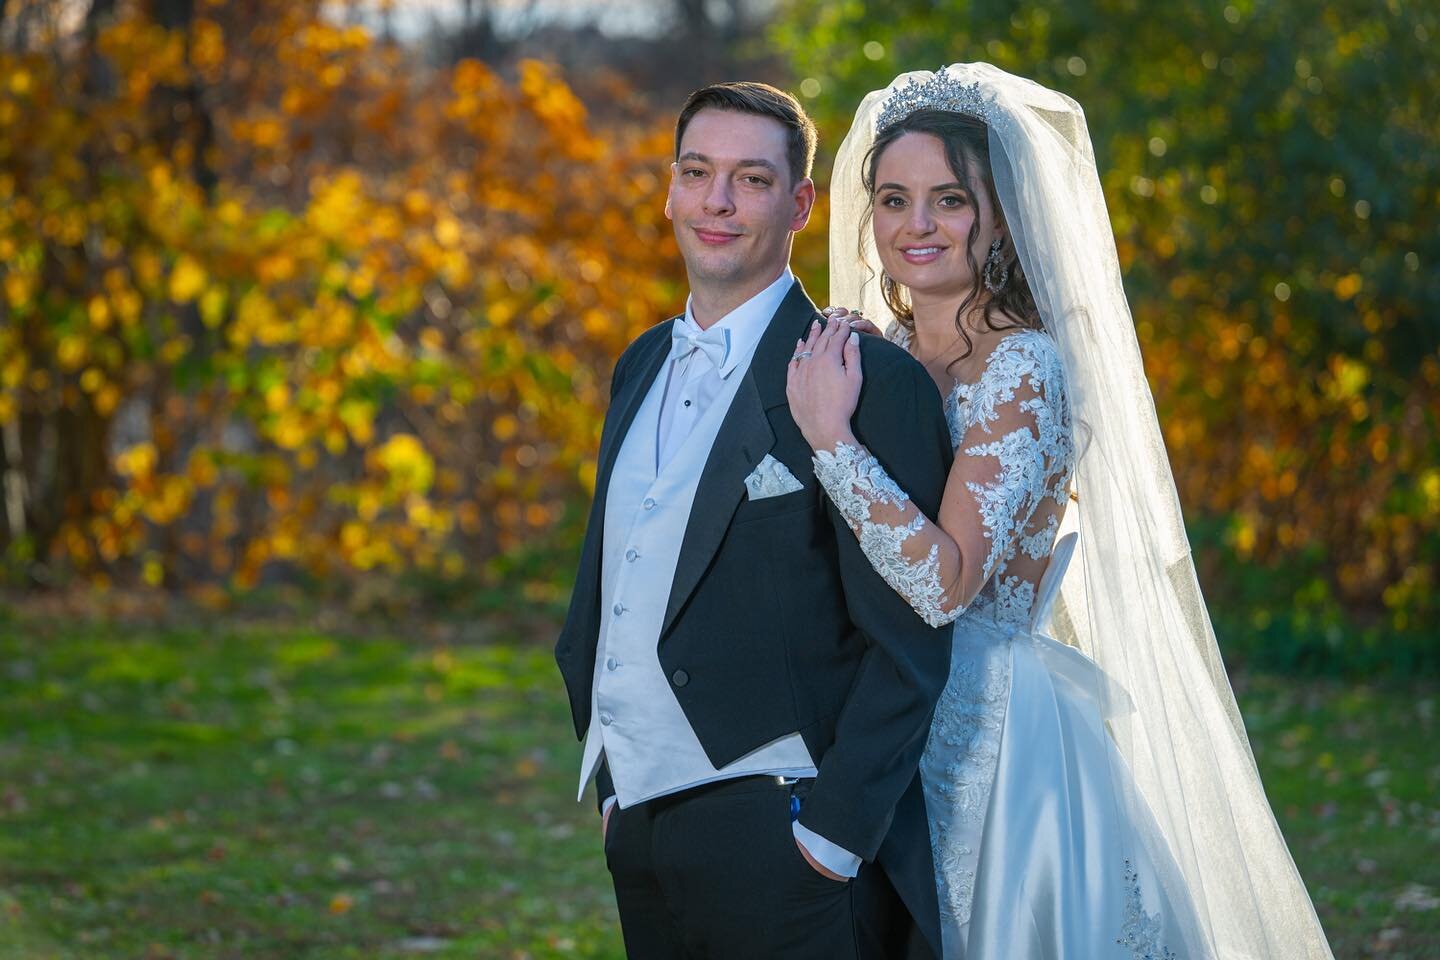 Ivana and Mitch were married at Our Lady of Carmel church on Friday and their reception at La Bella Vista in Waterbury.  #labellavistaweddings #bridaltrousseauct #modernformals #salonodette #weddingphotographerct #ctweddingphotographer #ctweddings #c